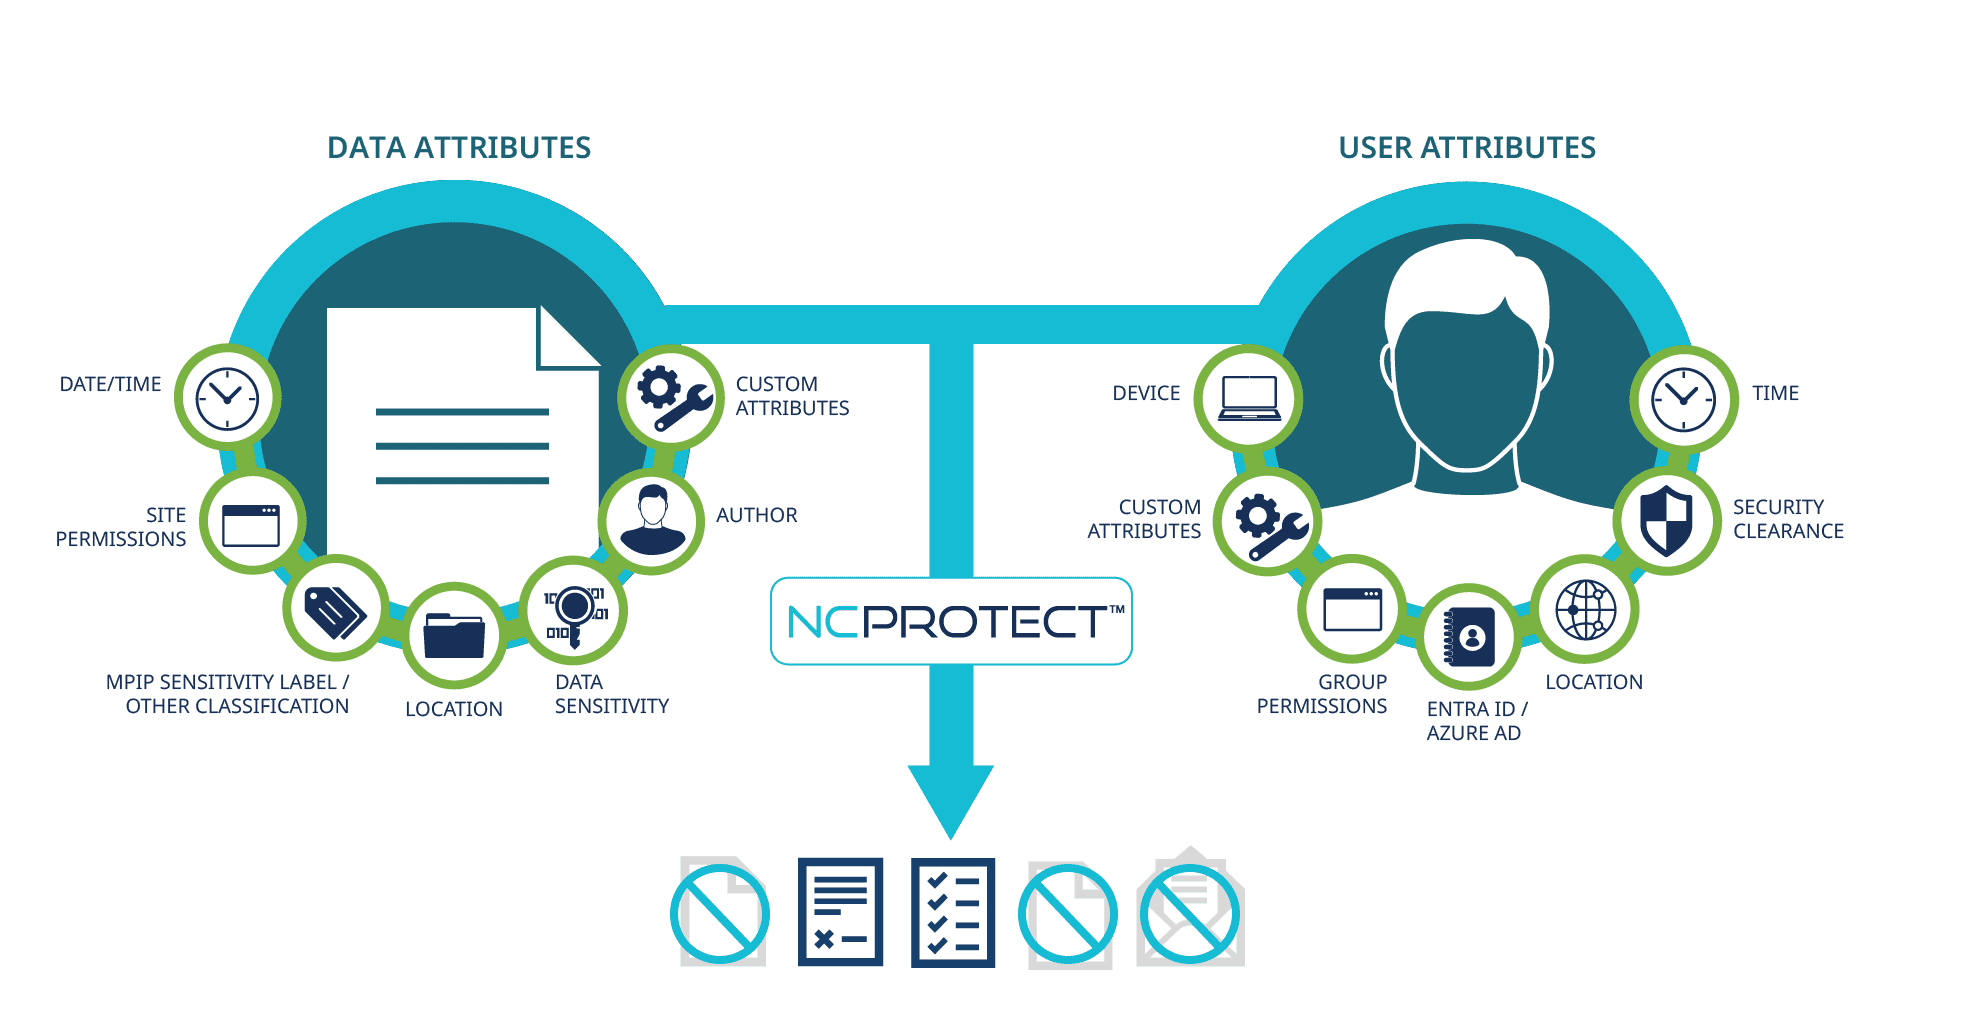 Graphic showing the NC protect system